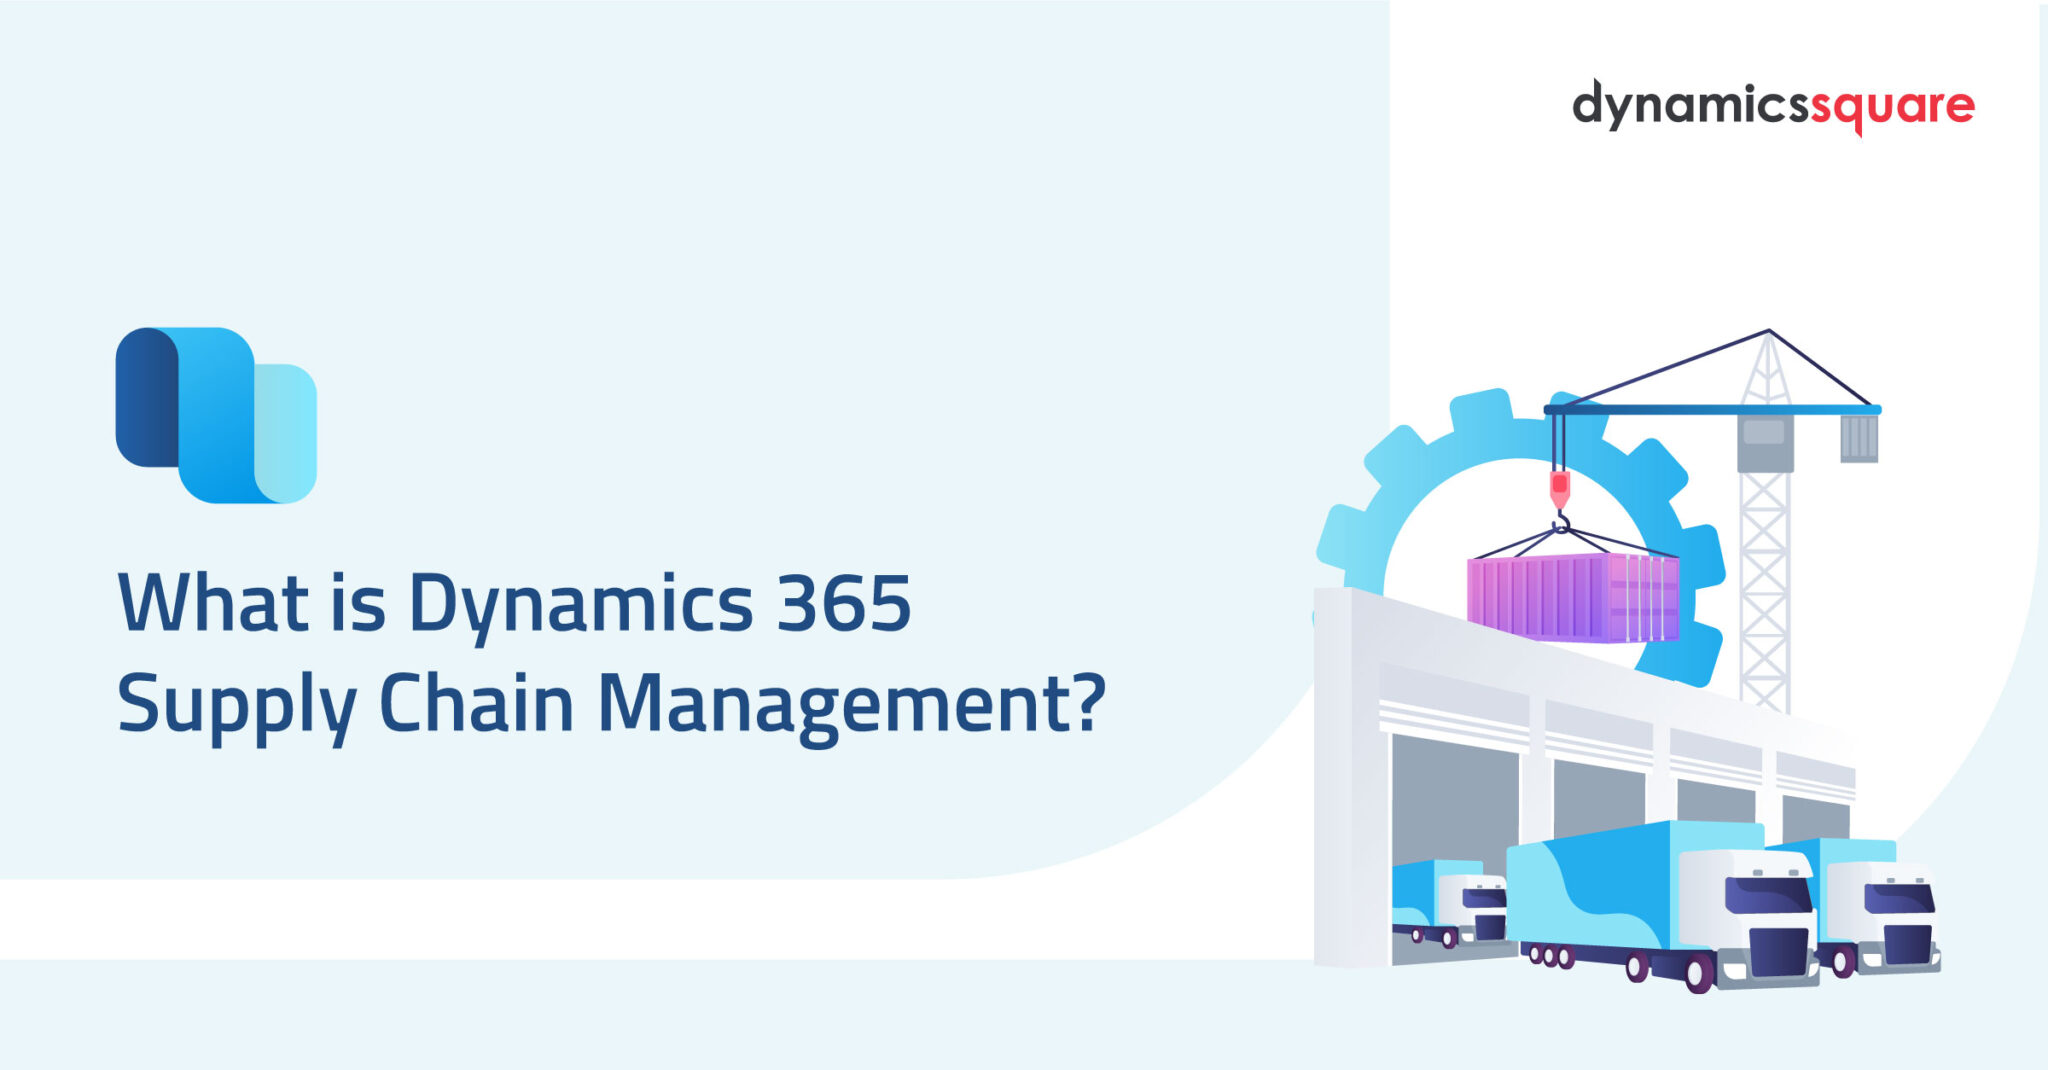 You are currently viewing Dynamics 365 Supply Chain Management